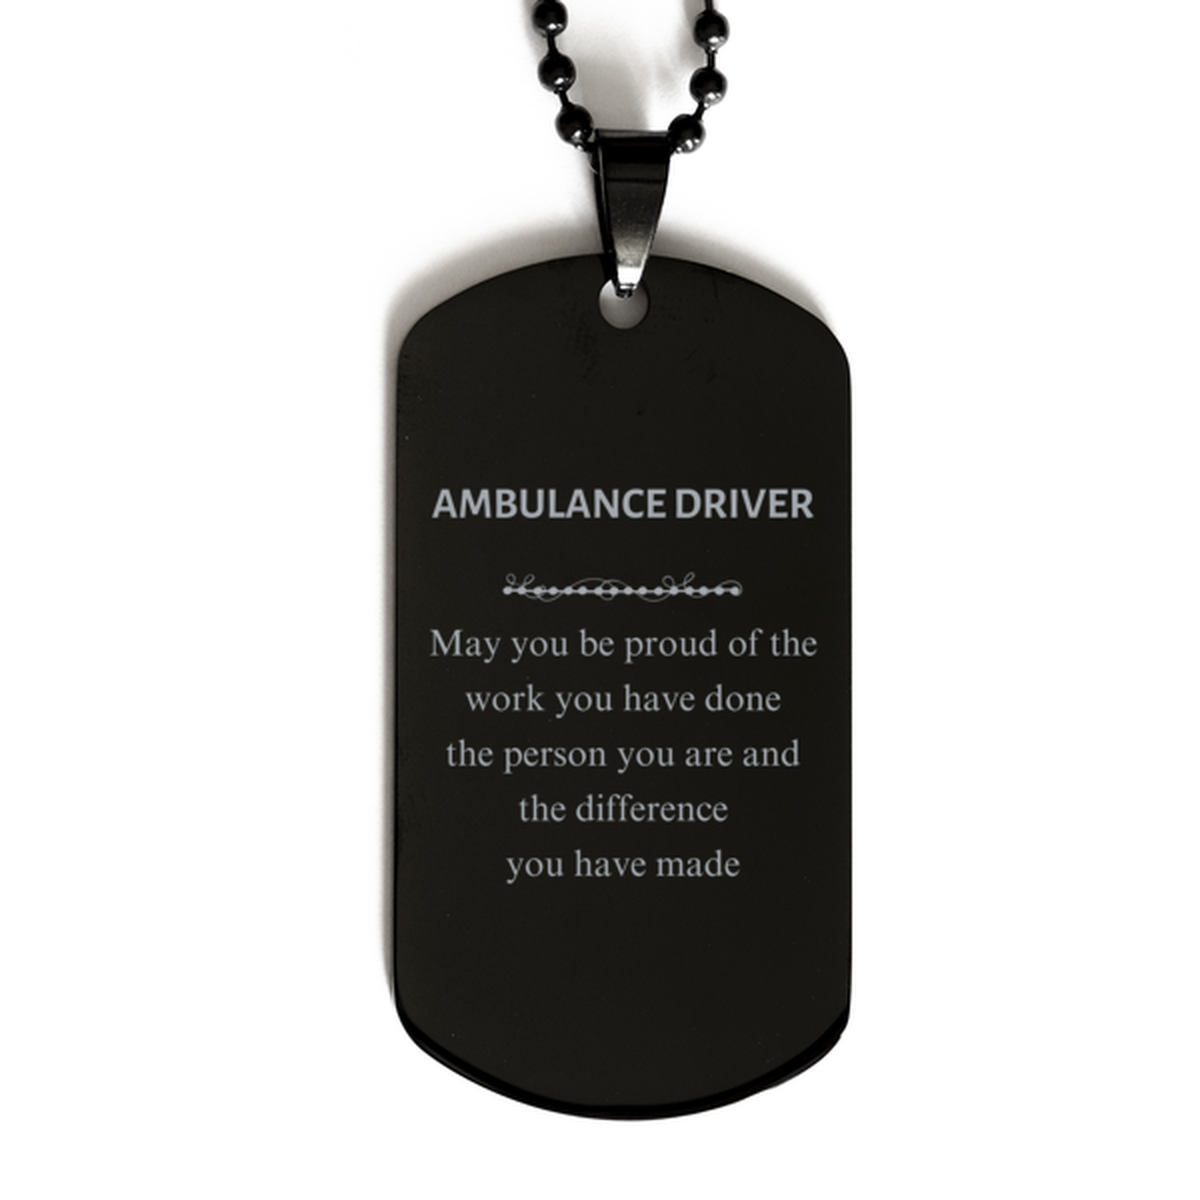 Ambulance Driver May you be proud of the work you have done, Retirement Ambulance Driver Black Dog Tag for Colleague Appreciation Gifts Amazing for Ambulance Driver